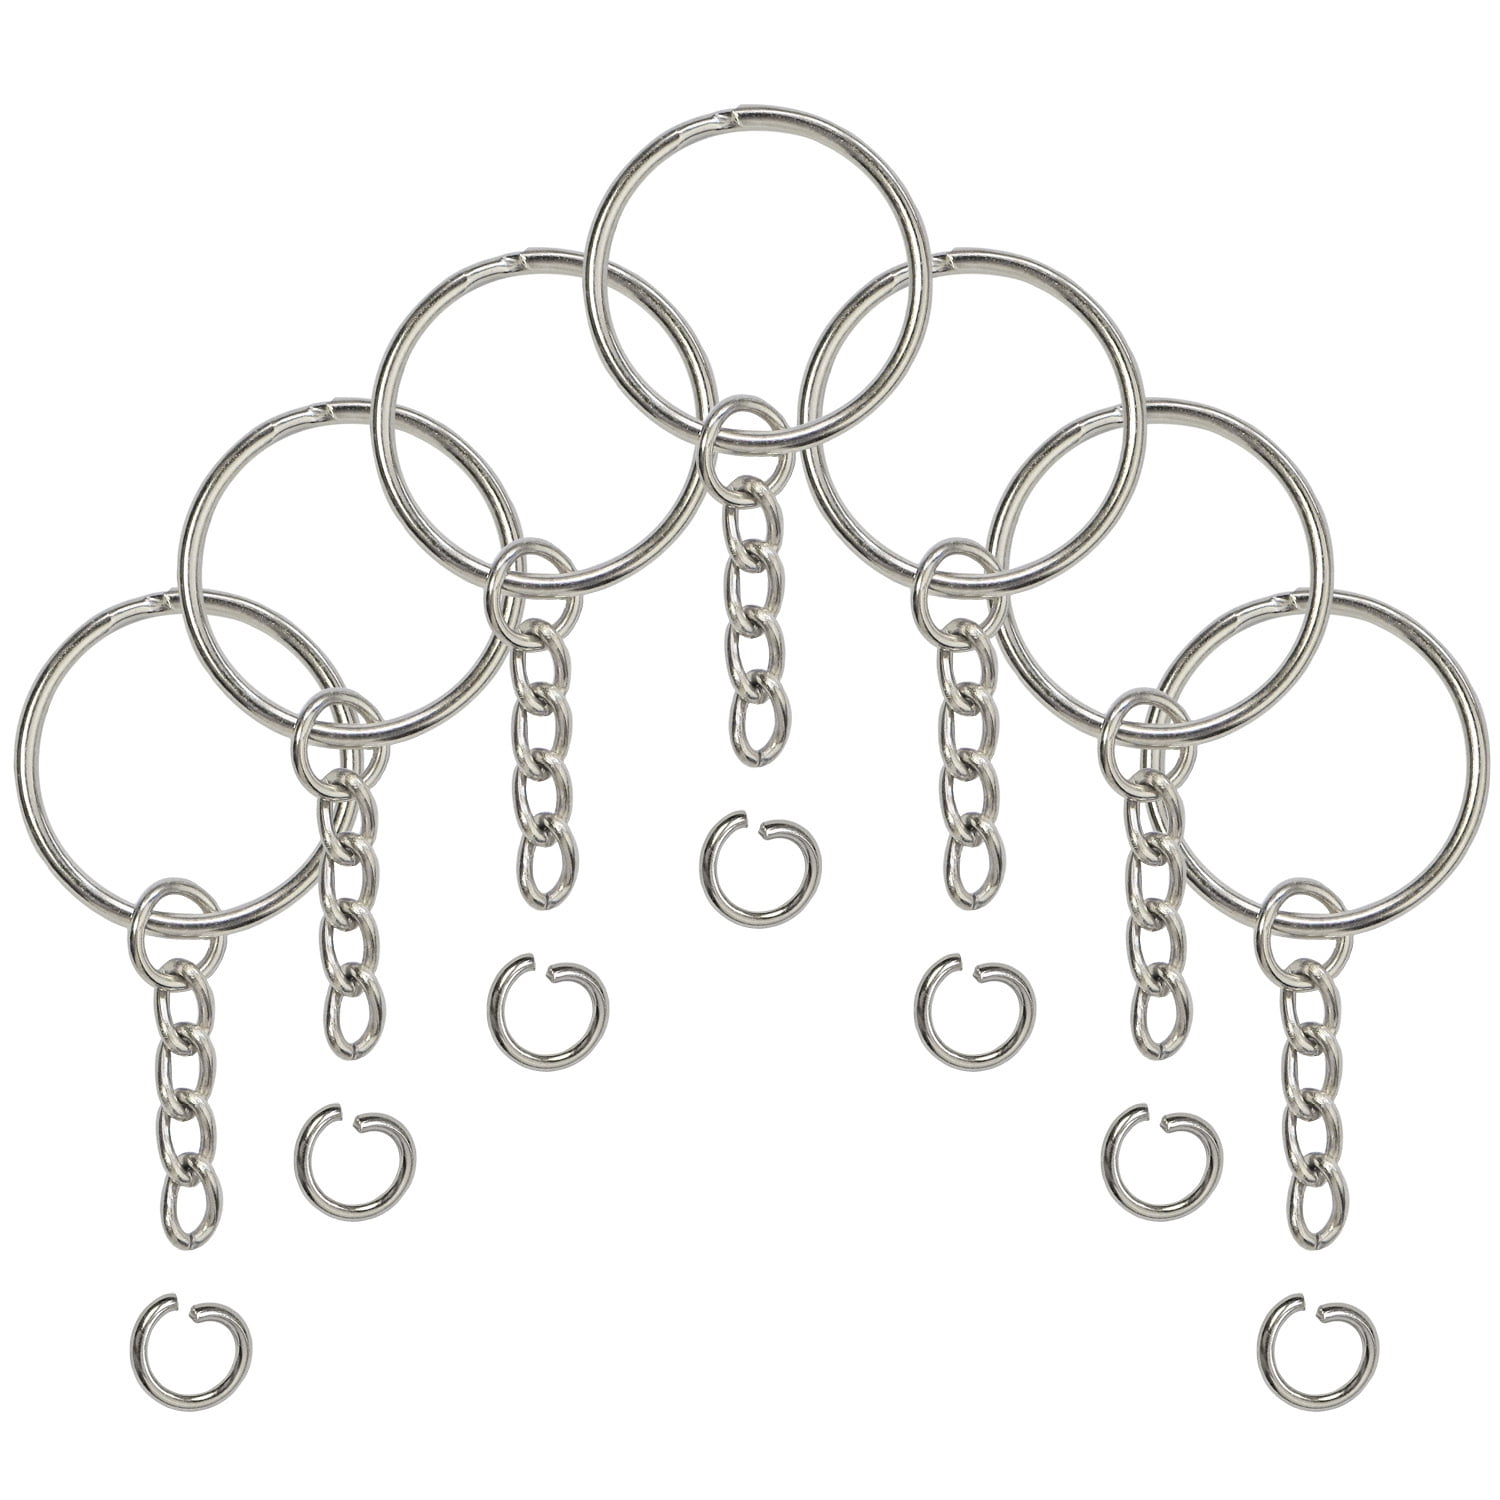 Split Rings Key Rings with 4 Link Flat Chain Silver & Gold color PM1 